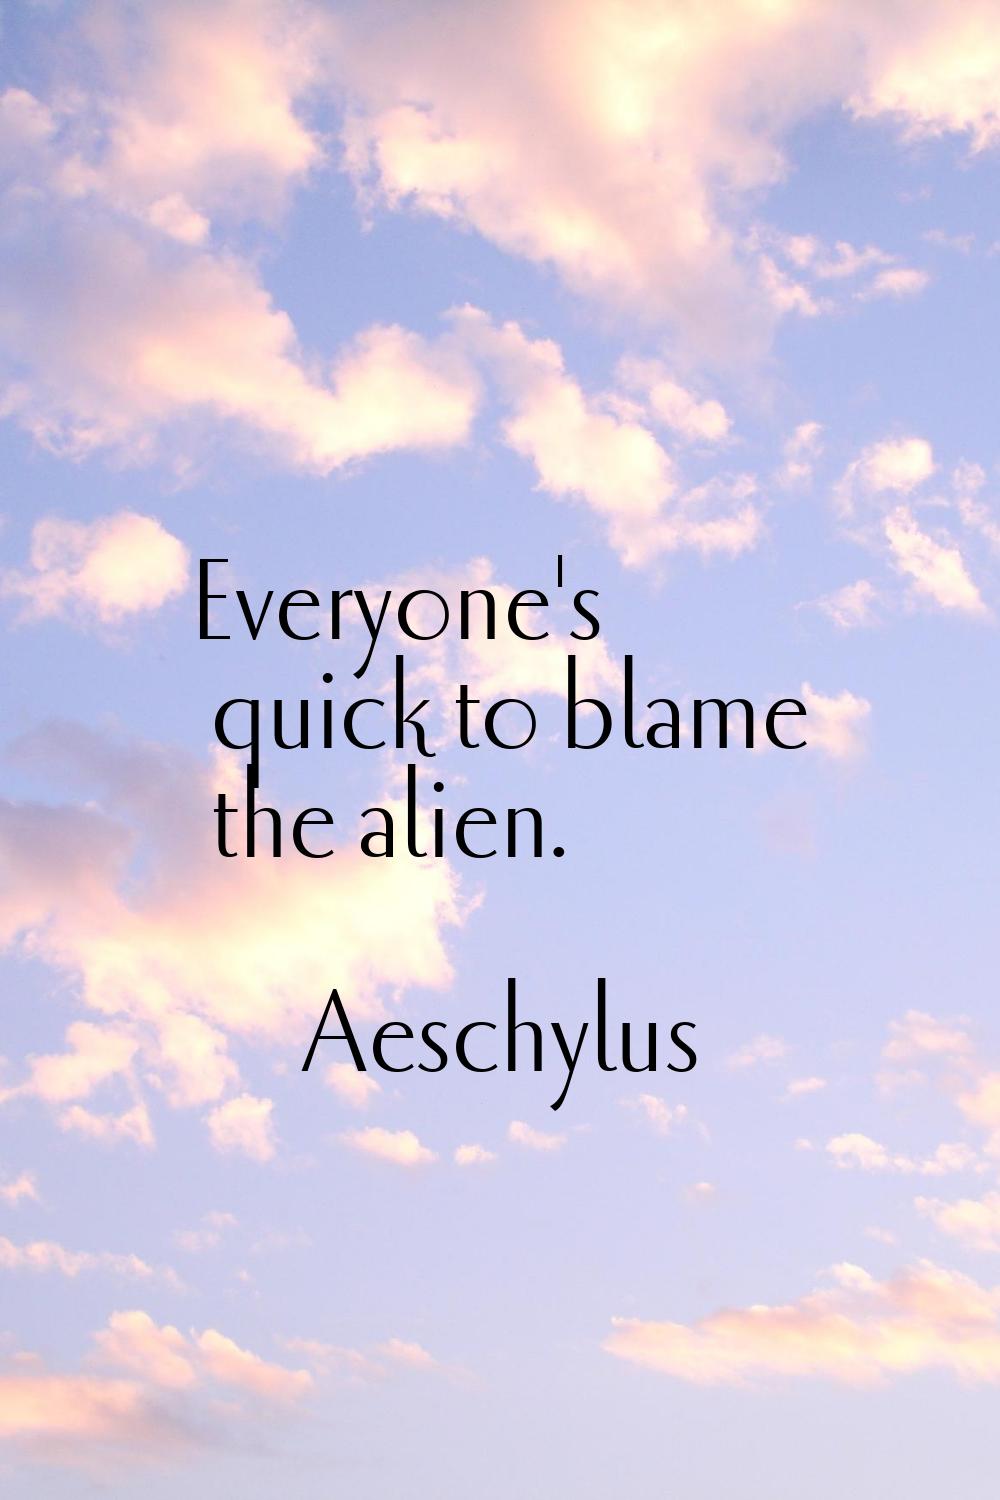 Everyone's quick to blame the alien.